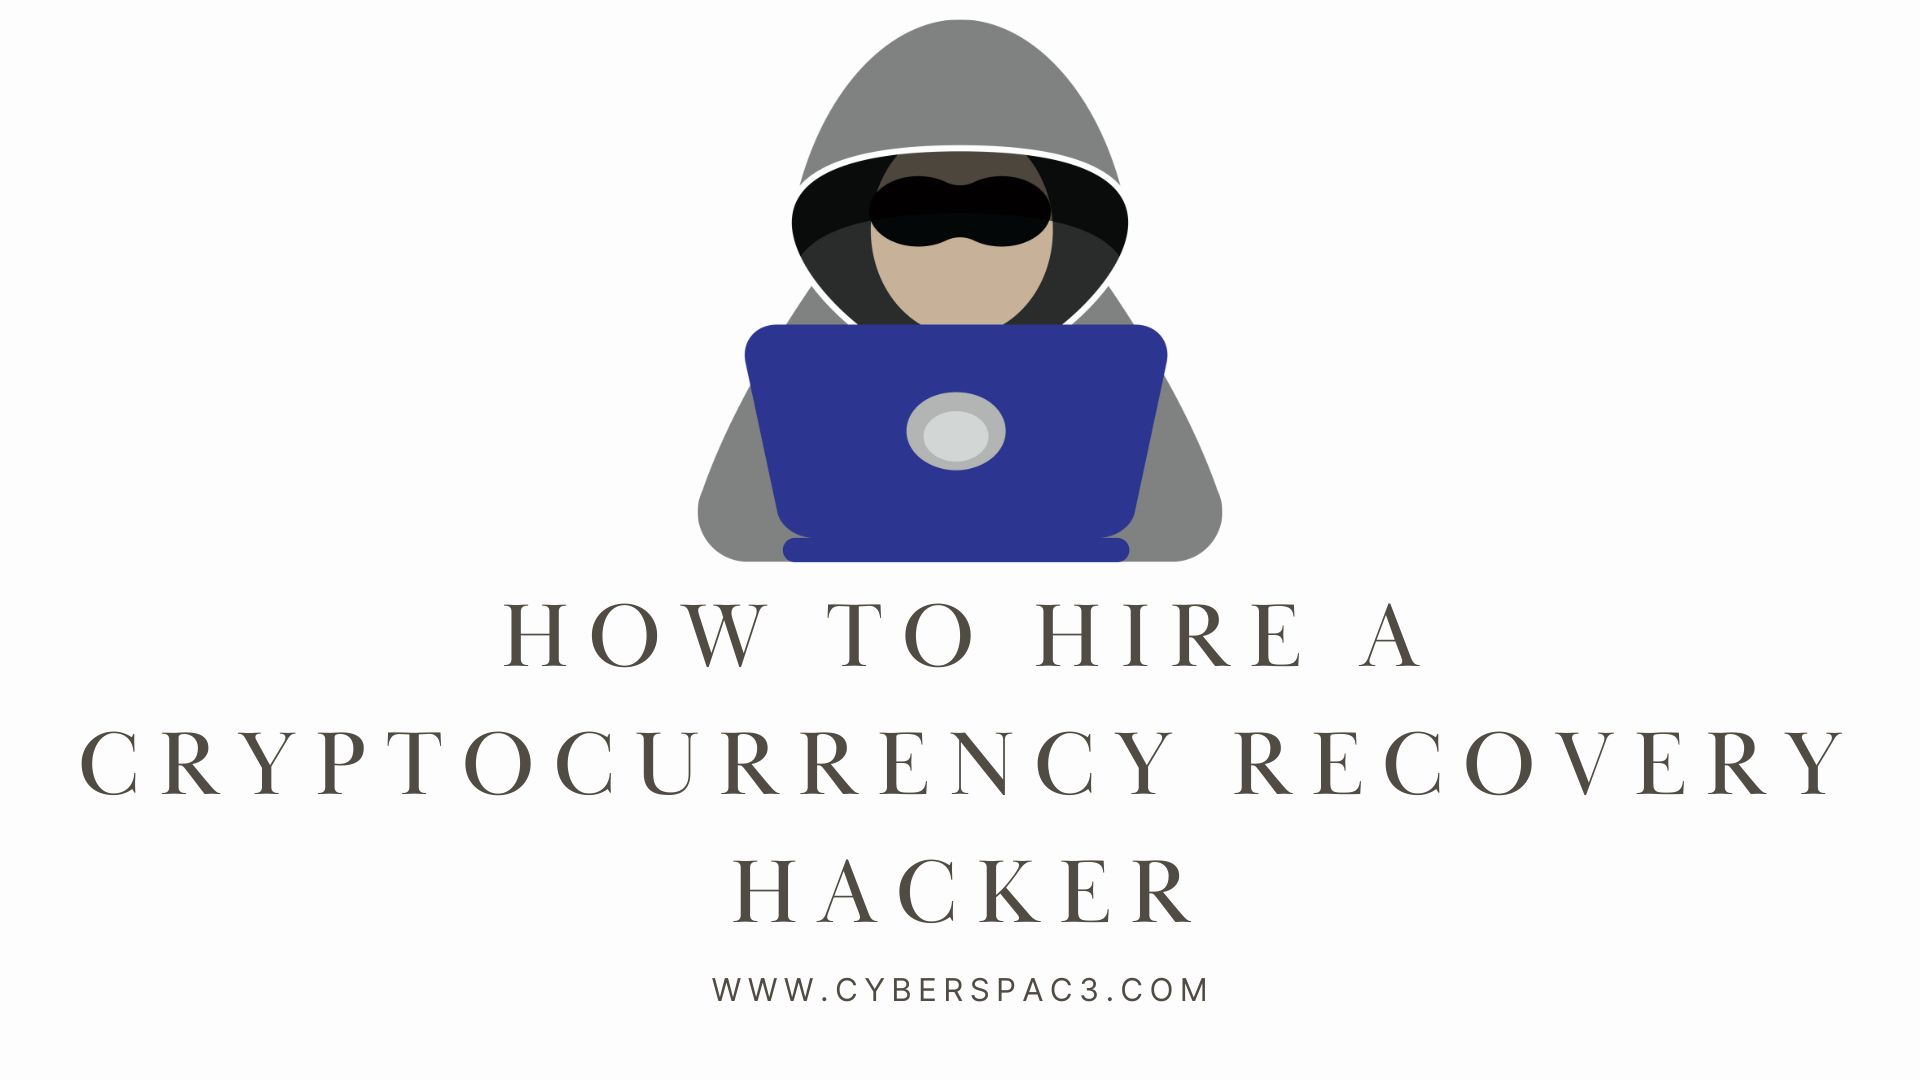 Hire a Cryptocurrency Recovery Hacker